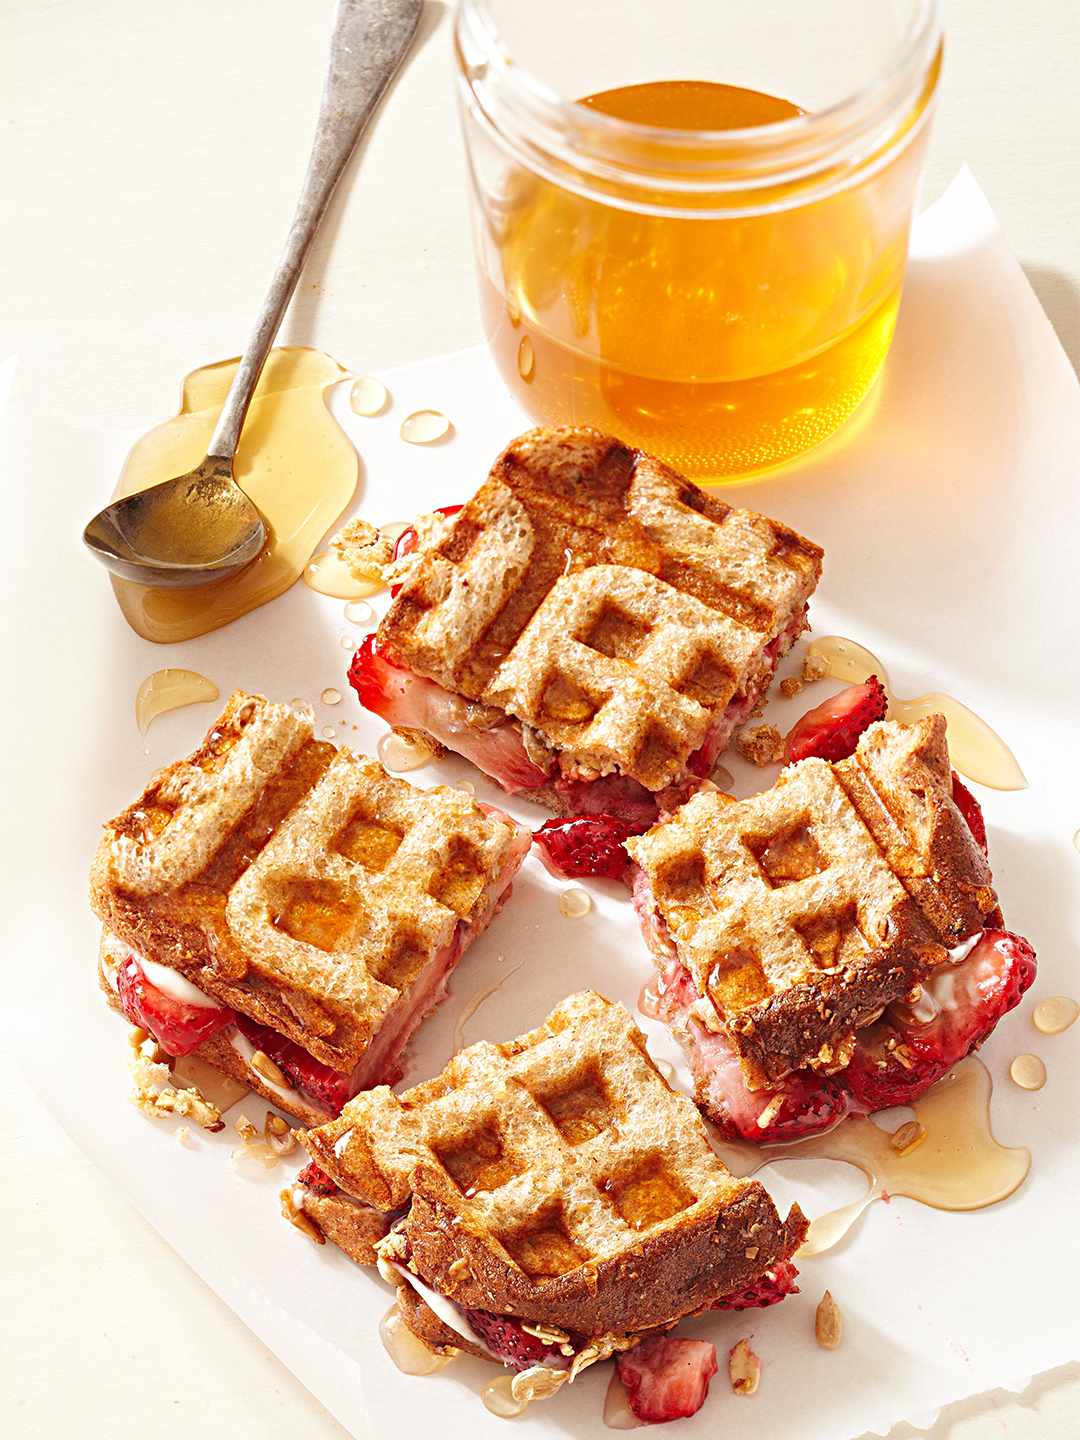 Strawberries and Cream Cheese Waffle Sandwiches